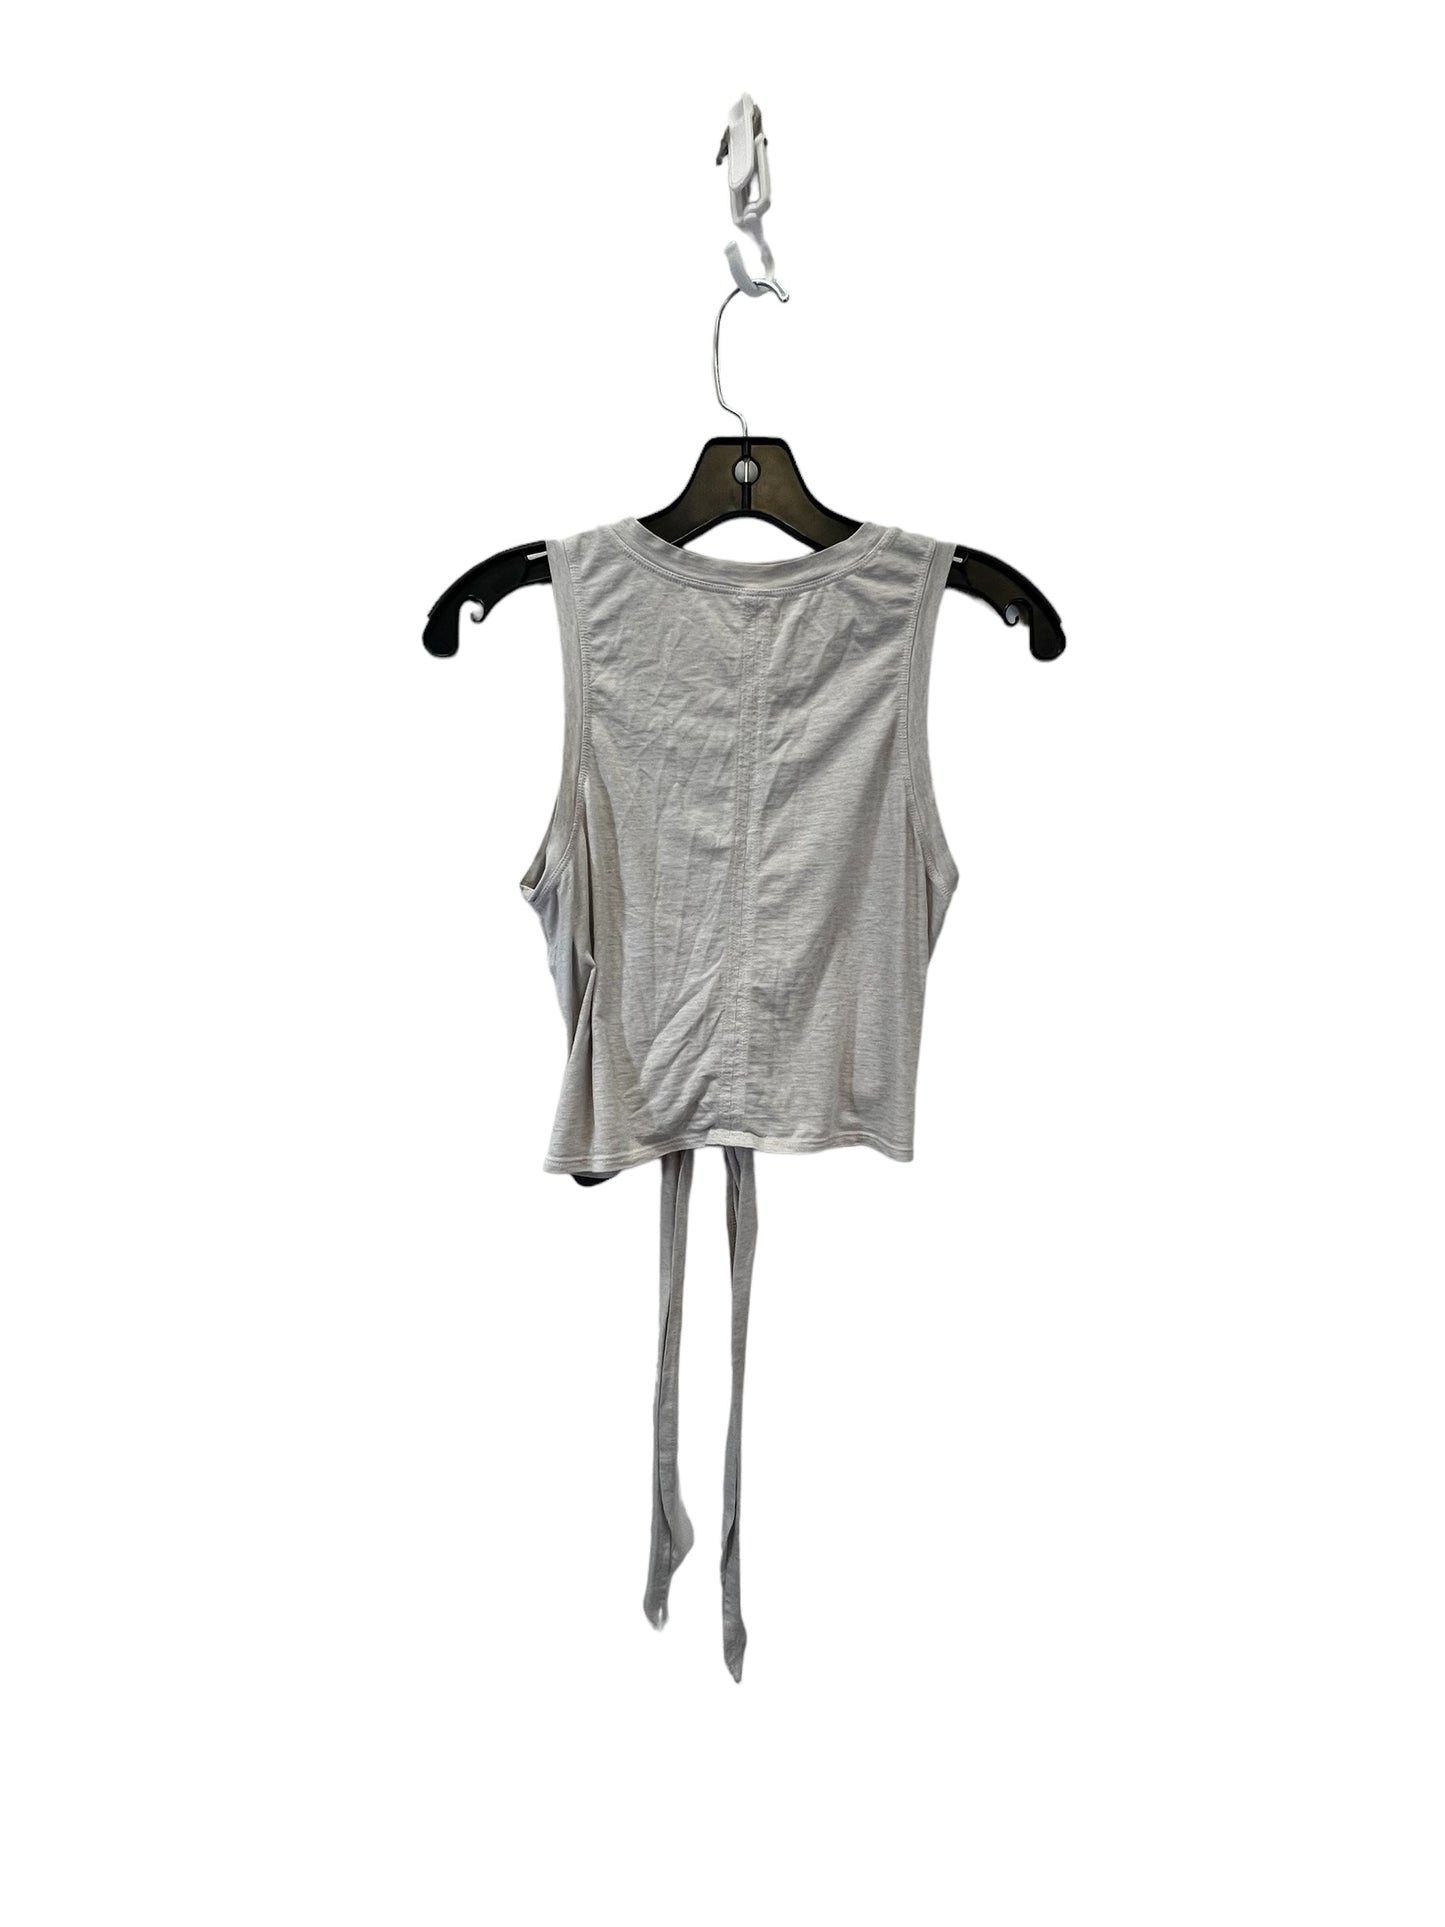 Taupe Athletic Tank Top Lululemon, Size S